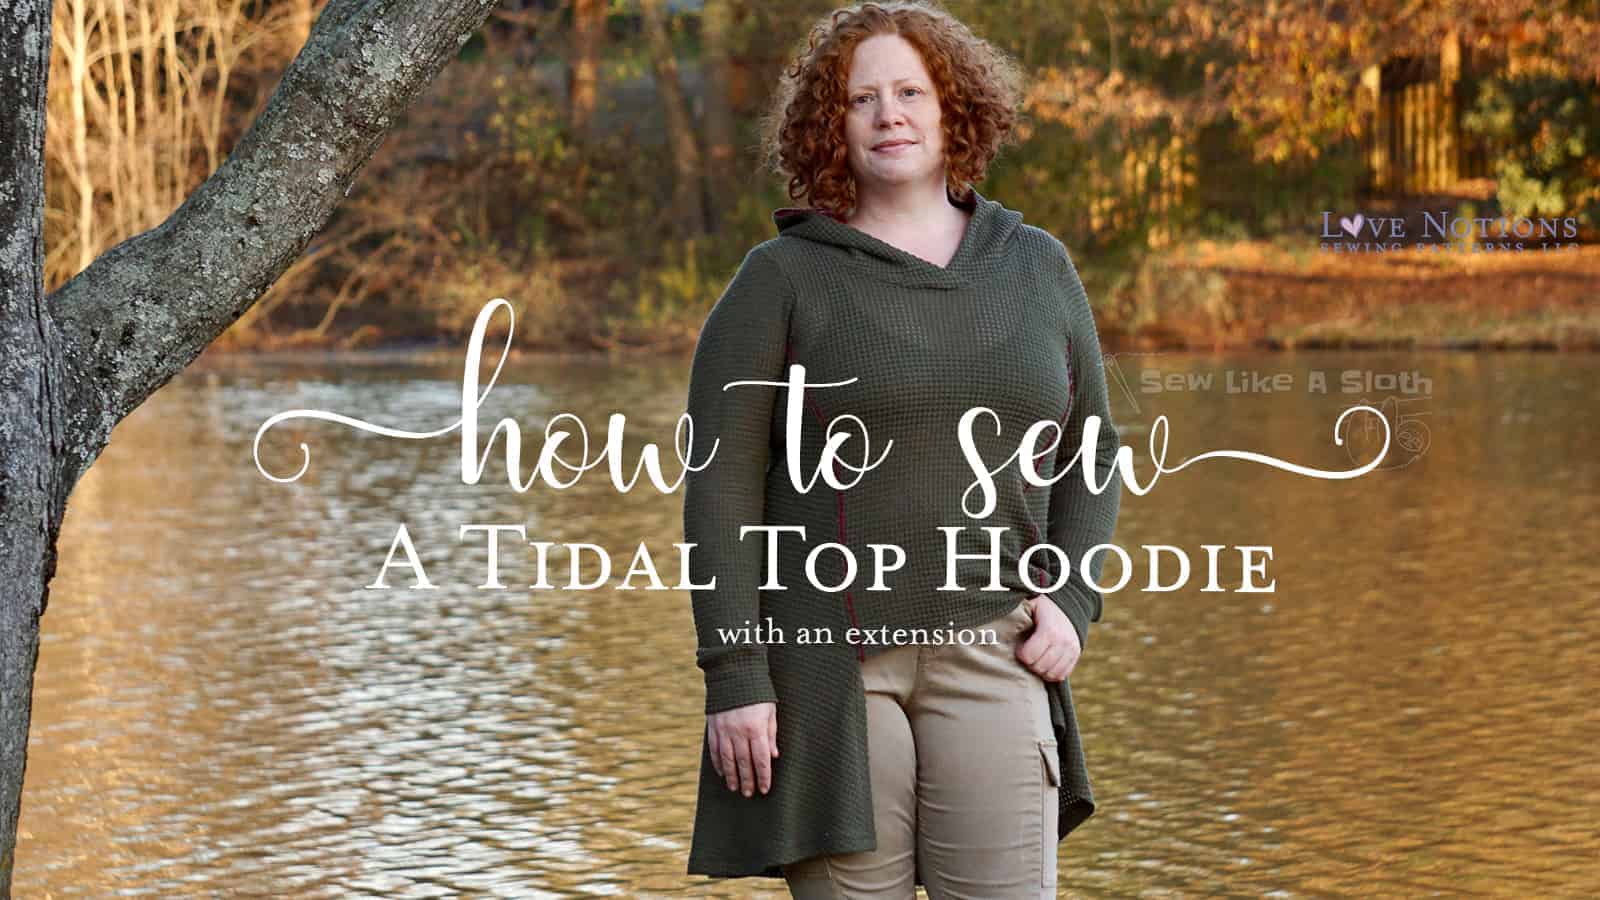 How to Make a Tidal Hoodie with Extension